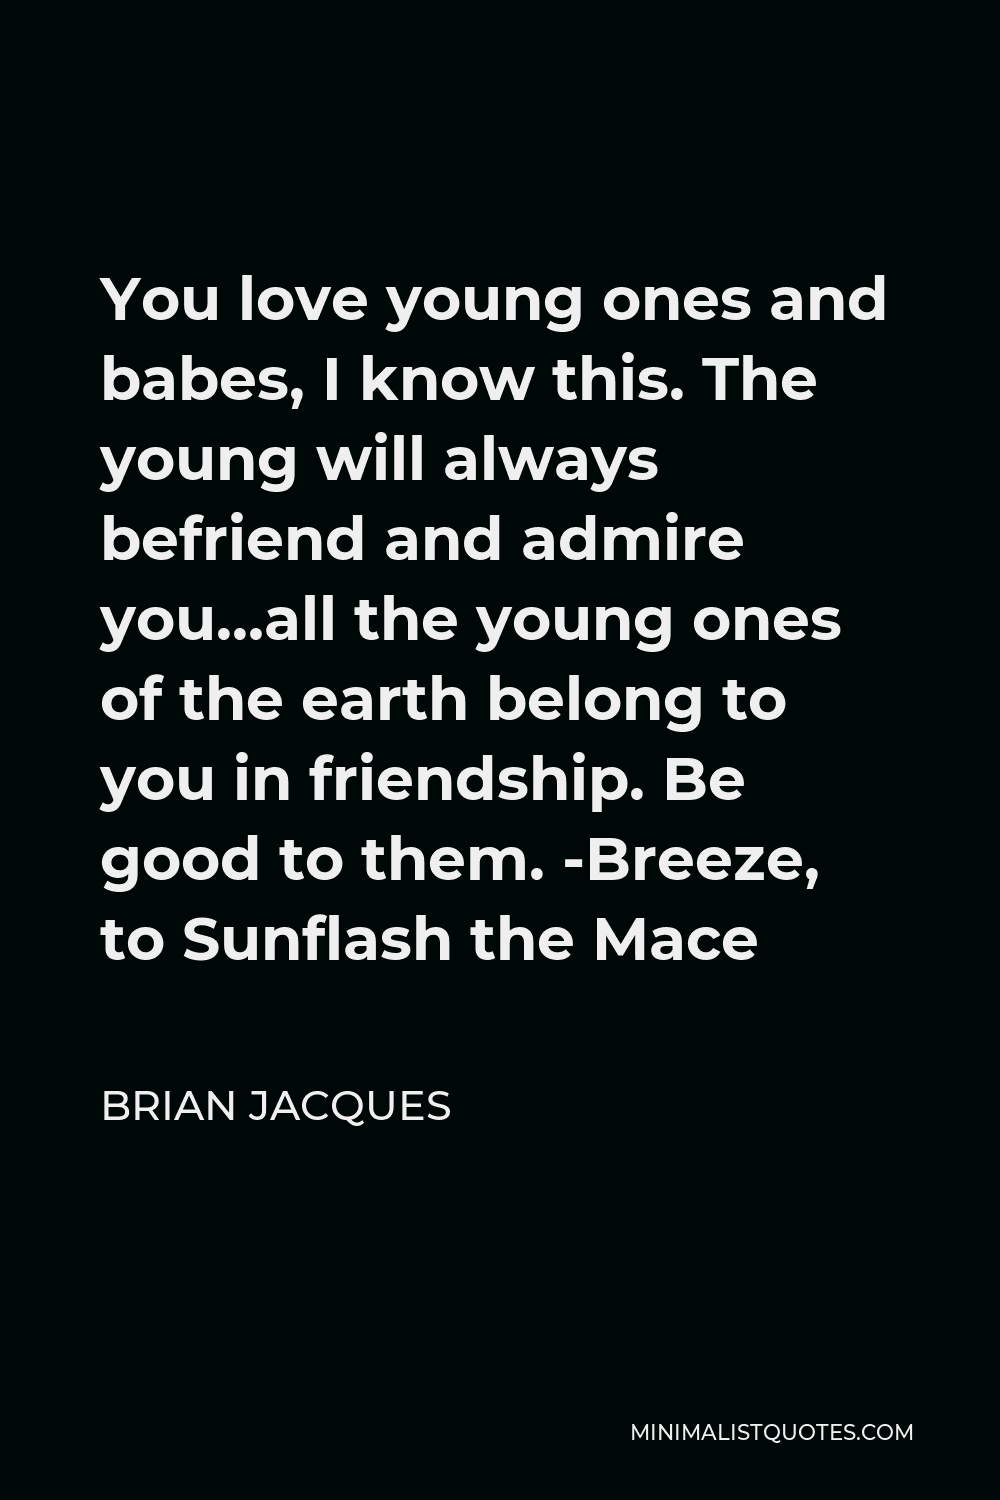 Brian Jacques Quote - You love young ones and babes, I know this. The young will always befriend and admire you…all the young ones of the earth belong to you in friendship. Be good to them. -Breeze, to Sunflash the Mace